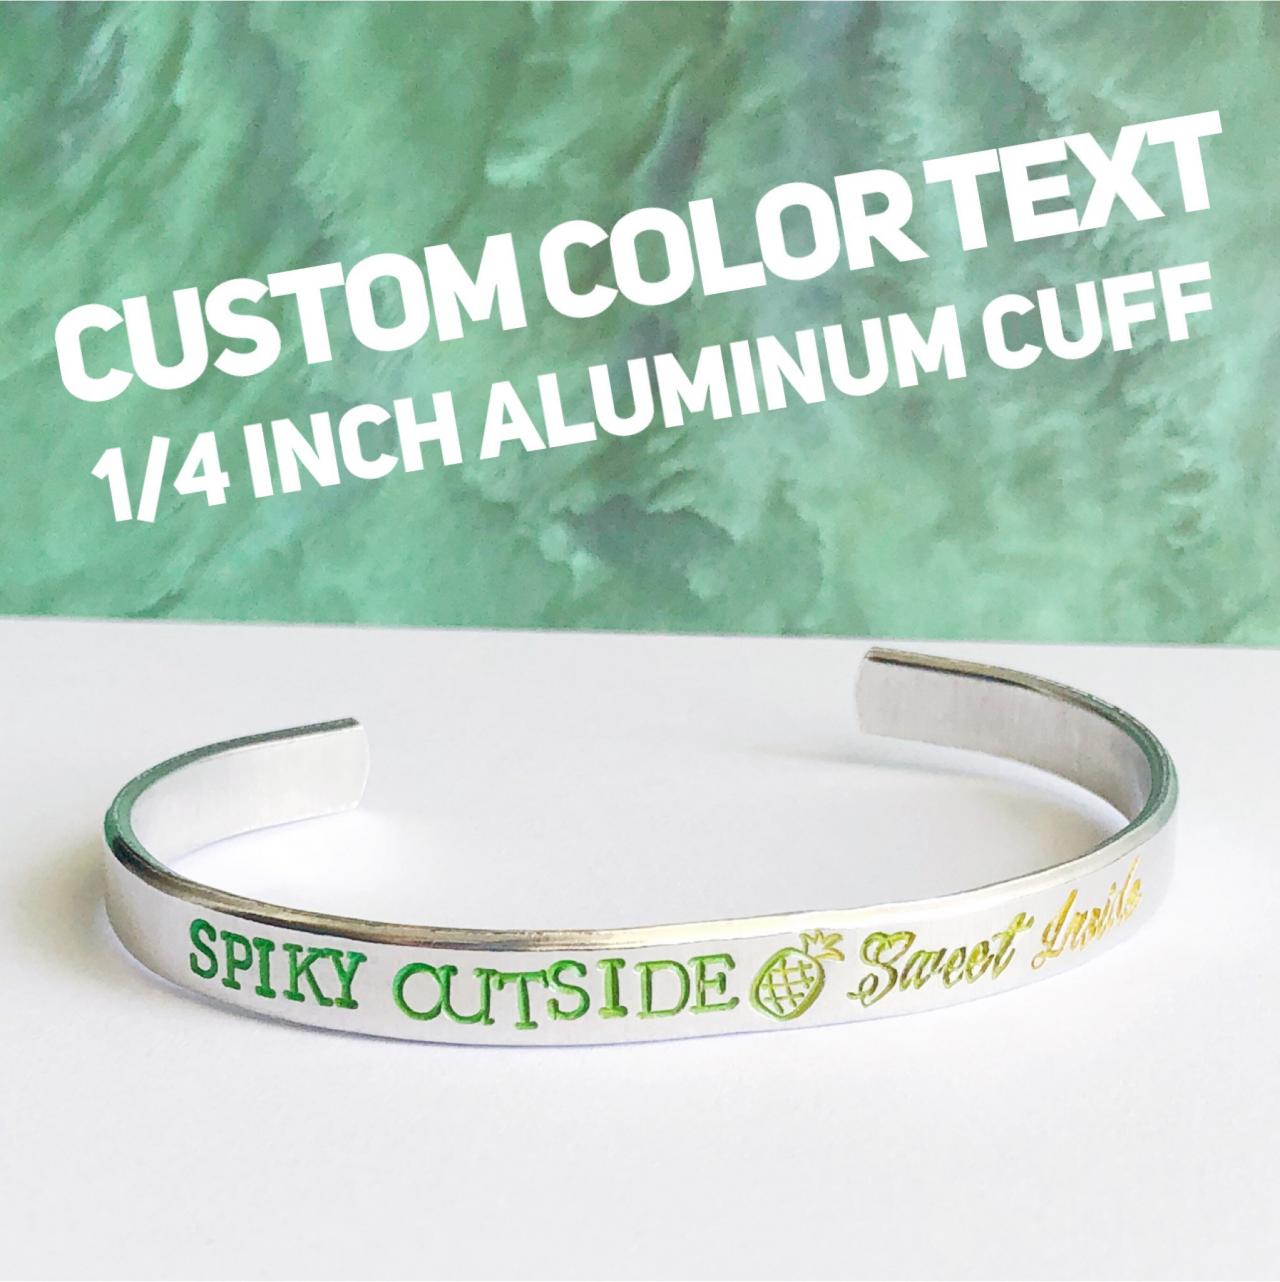 Color Text Custom Quote Aluminum Metal Stamped Cuff Bracelet 1/4 Inch //personalized Gift // Hypoallergenic Rust Proof And Tarnish Proof